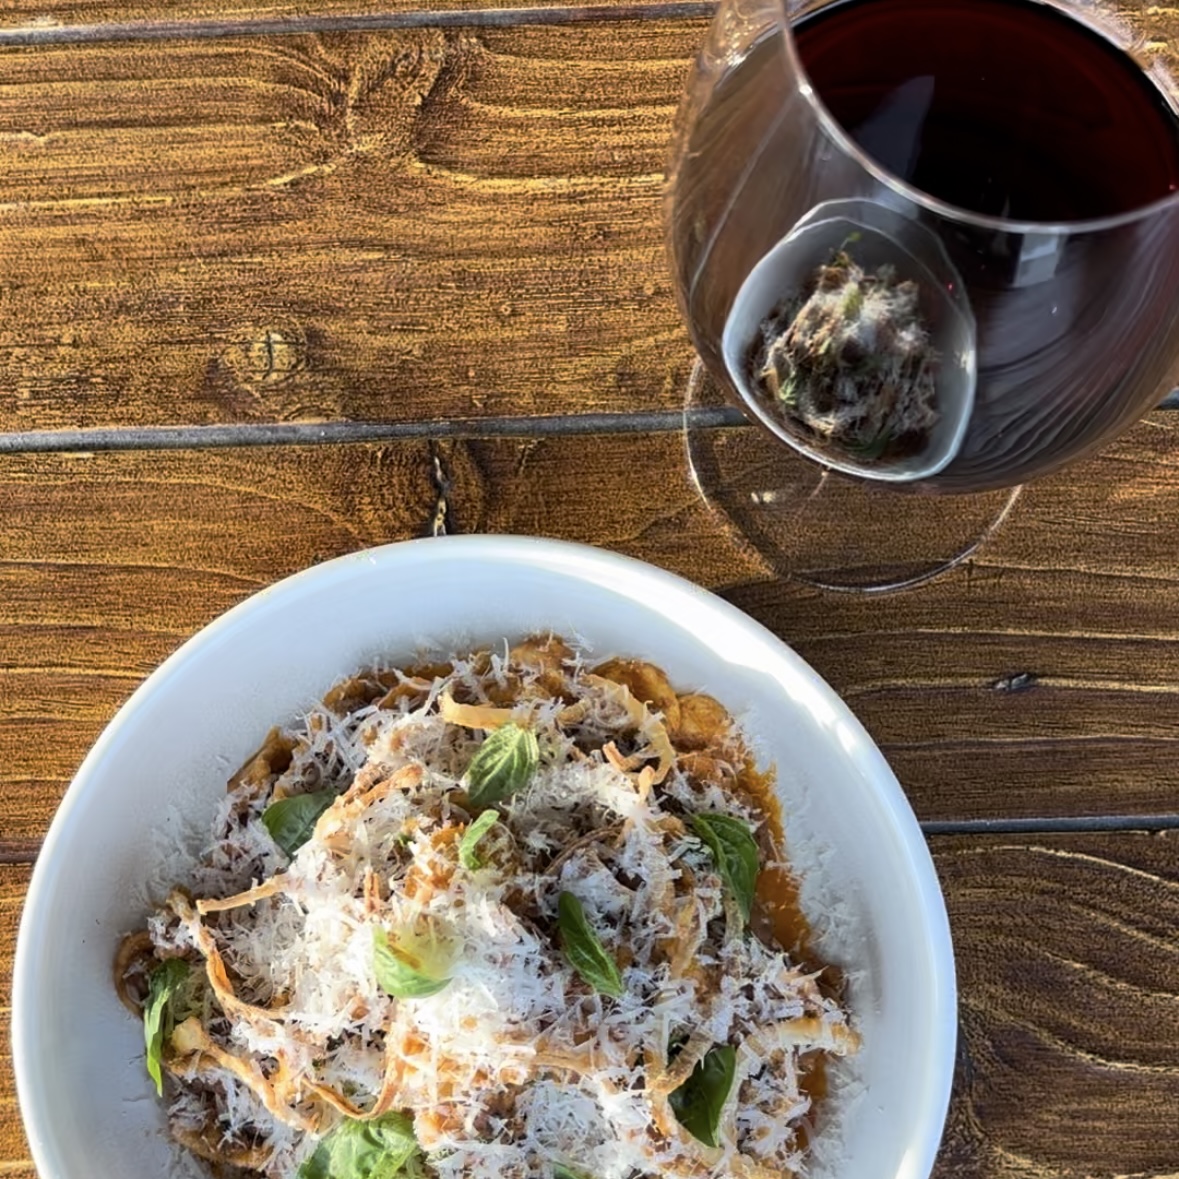 Wine and Food Pairing in the Okanagan